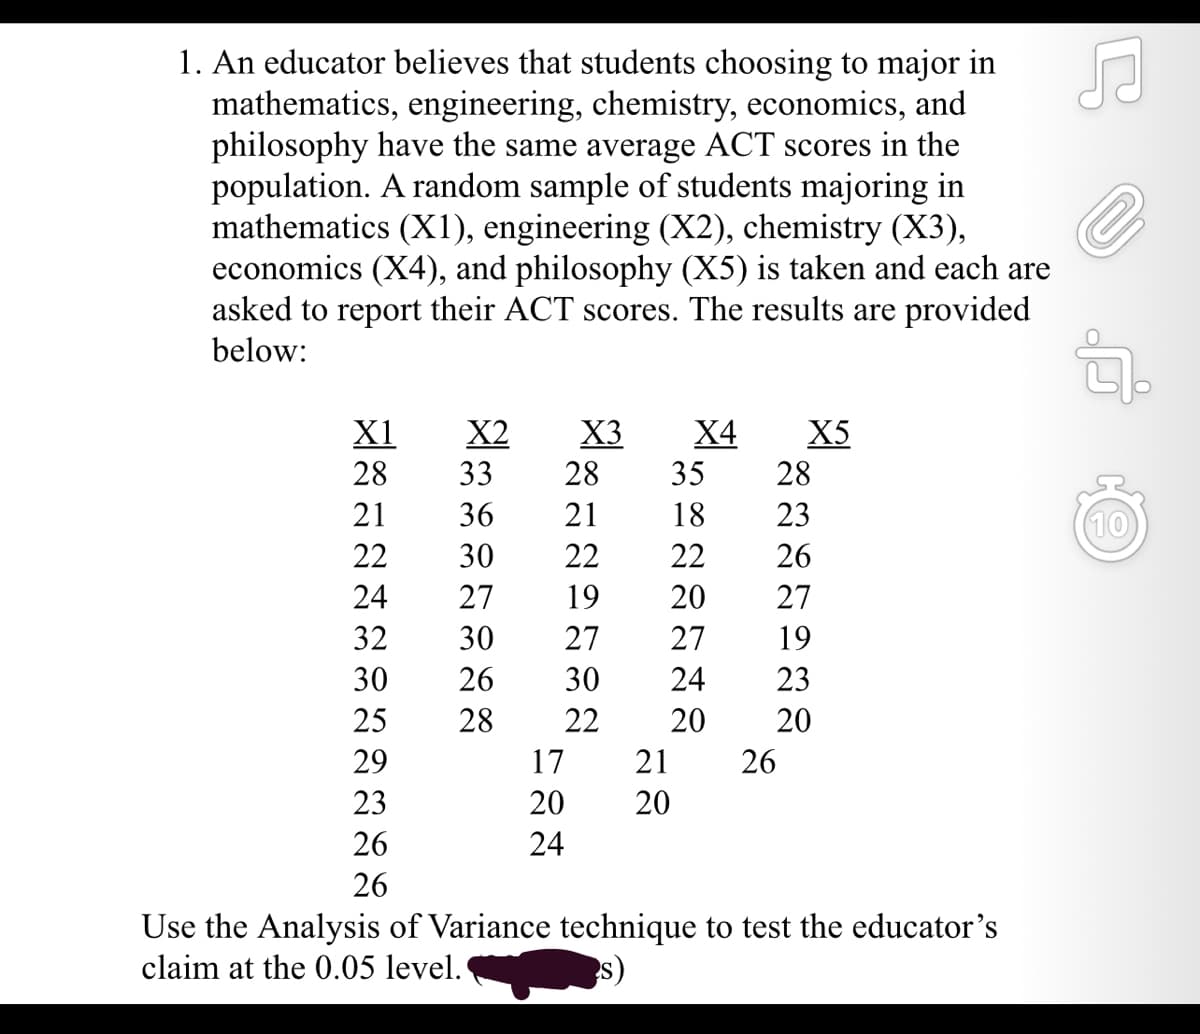 1. An educator believes that students choosing to major in
mathematics, engineering, chemistry, economics, and
philosophy have the same average ACT scores in the
population. A random sample of students majoring in
mathematics (X1), engineering (X2), chemistry (X3),
economics (X4), and philosophy (X5) is taken and each are
asked to report their ACT scores. The results are provided
below:
X3
35
X1
X2
Х4
X5
28
33
28
28
21
36
21
18
23
10
22
30
22
22
26
24
27
19
20
27
32
30
27
27
19
30
26
30
24
23
25
28
22
20
20
29
17
21
26
23
20
20
26
24
26
Use the Analysis of Variance technique to test the educator's
claim at the 0.05 level.
